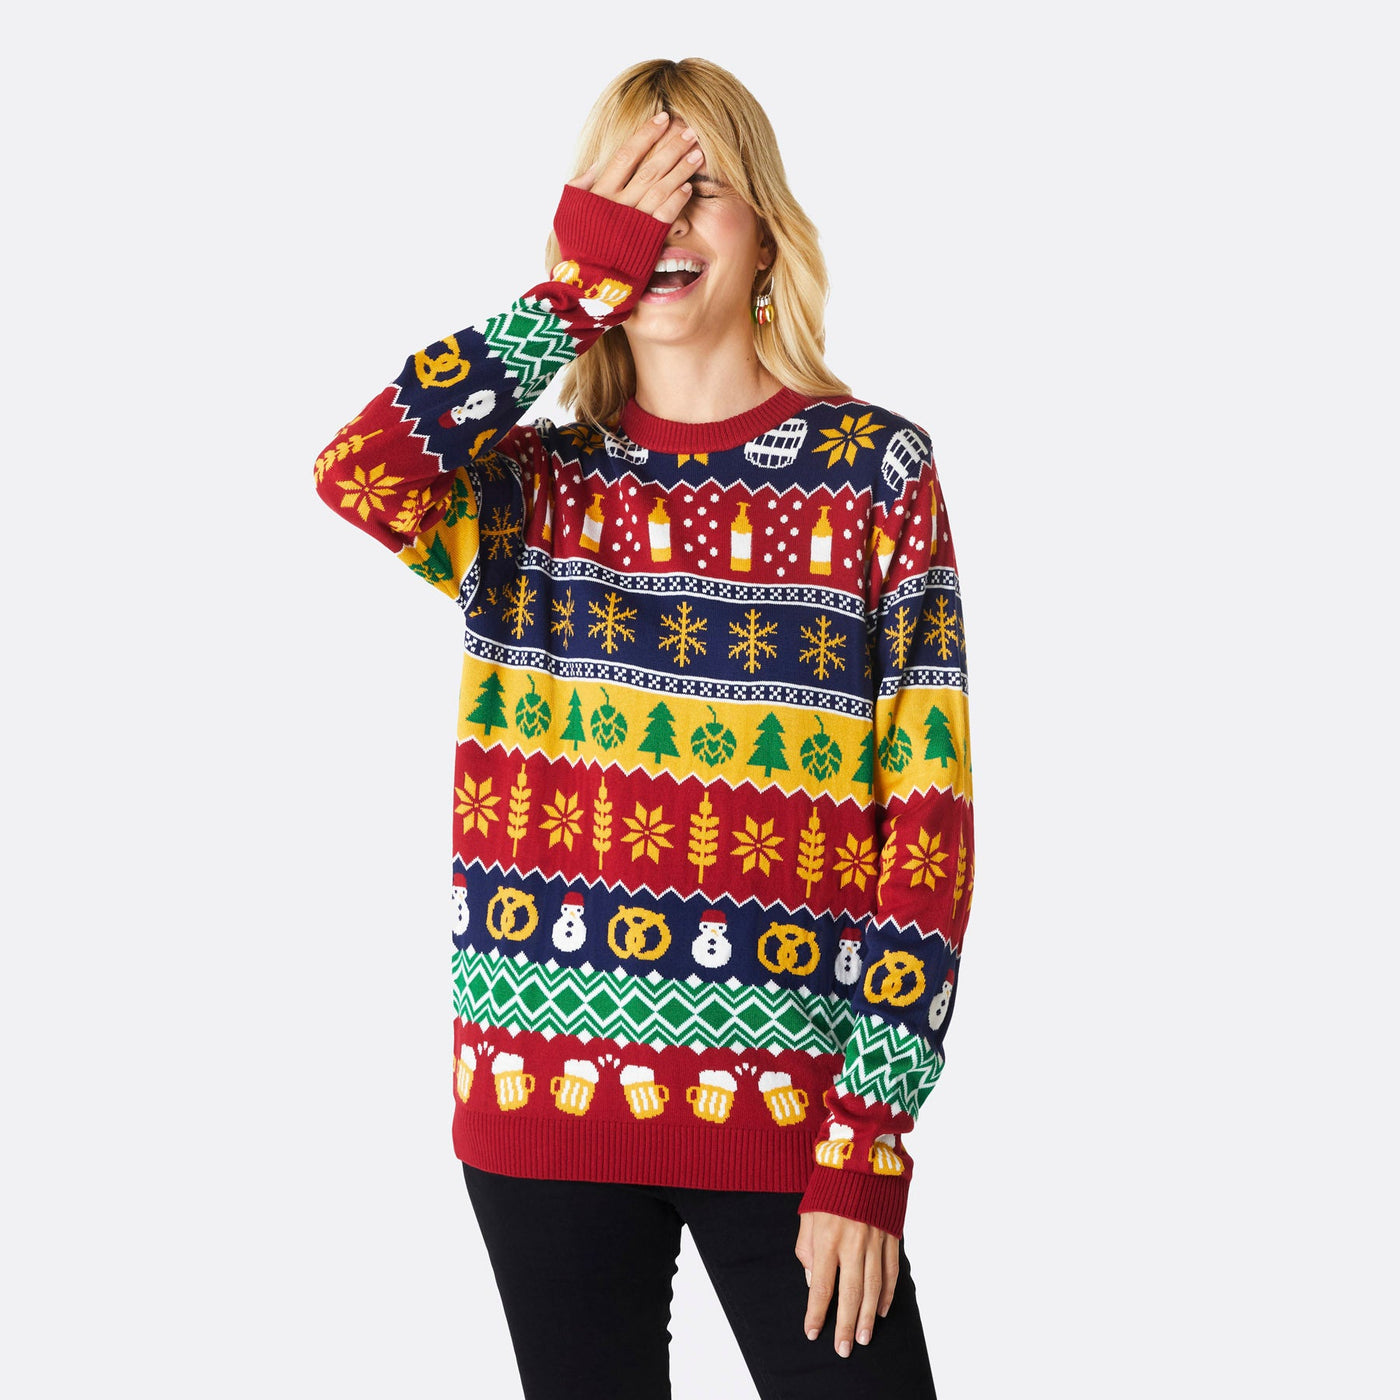 Women's Striped Beer Christmas Sweater